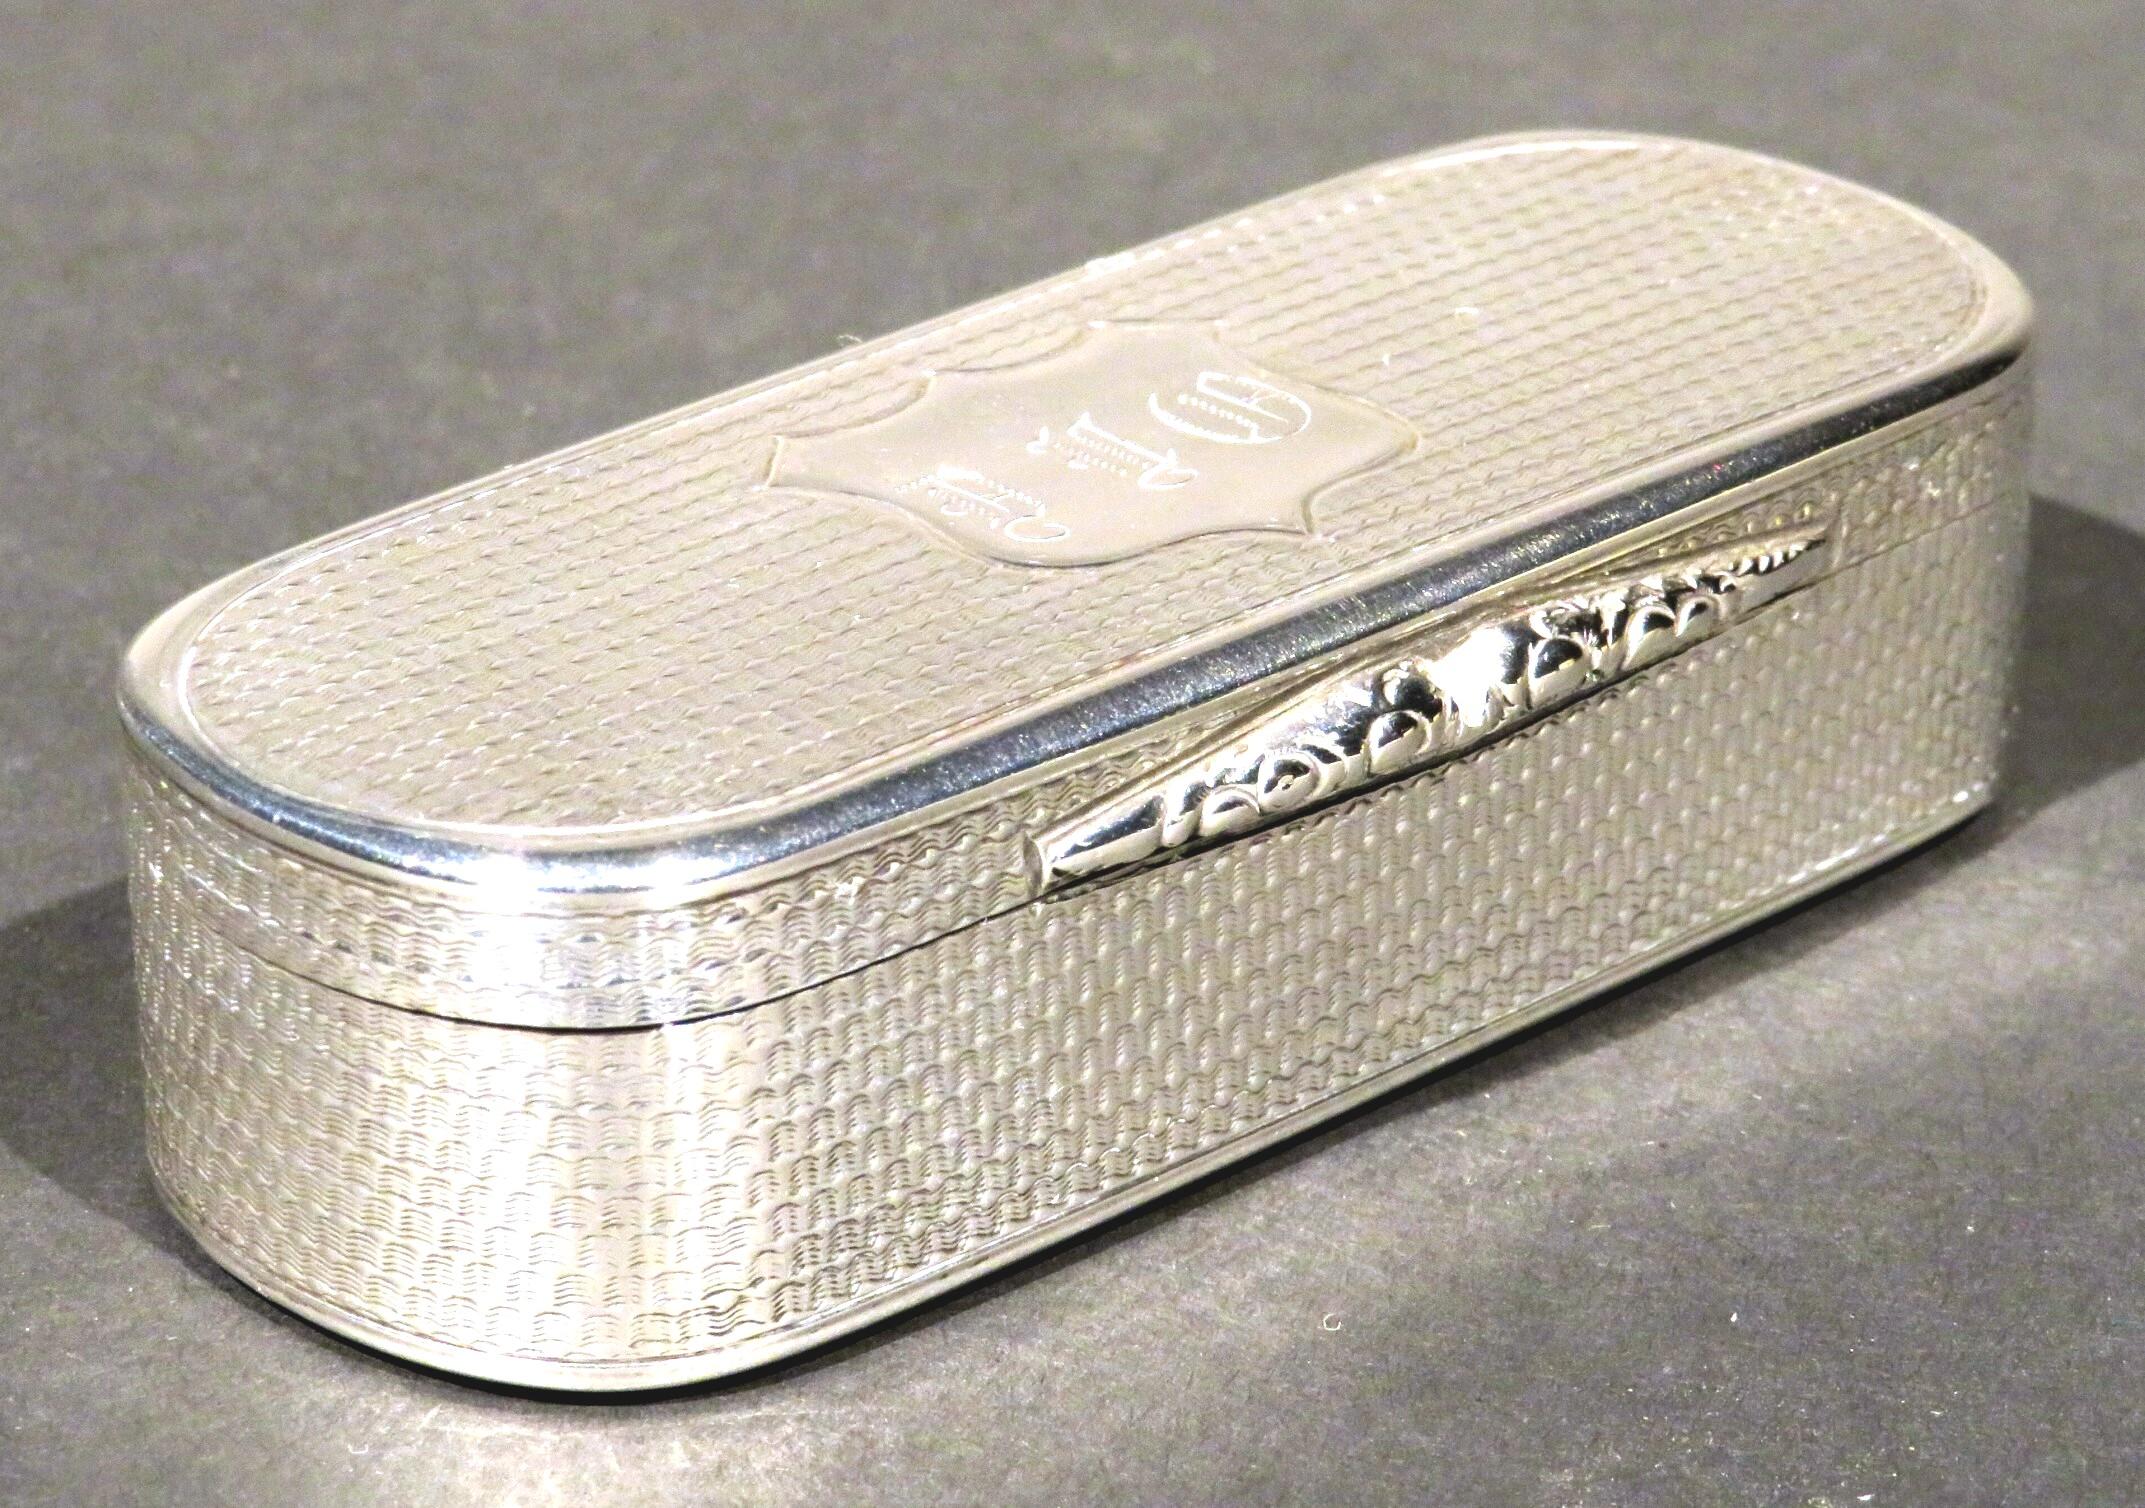 A very good 19th century Victorian sterling silver snuff box of oblong form, showing a hinged lid engraved with machined undulating wavy motifs, centred by a monogrammed shield-shaped cartouche, opening to a richly gilded interior with both the lid